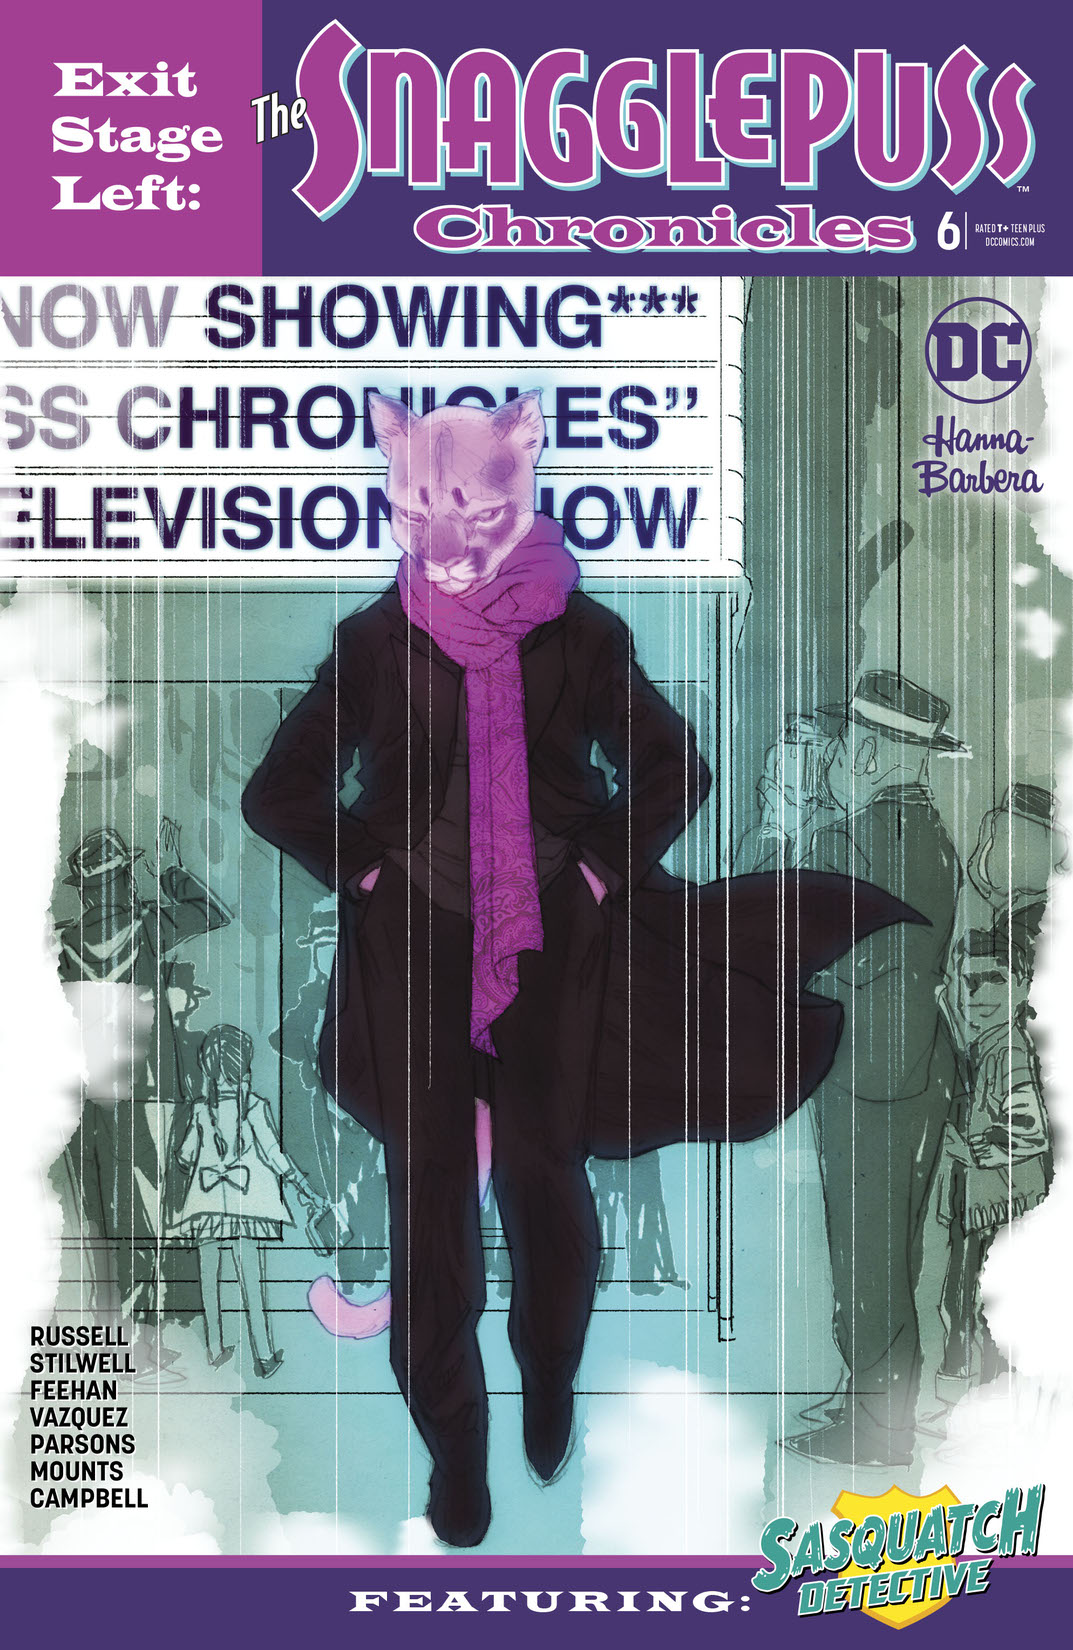 Exit Stage Left: The Snagglepuss Chronicles #6 preview images